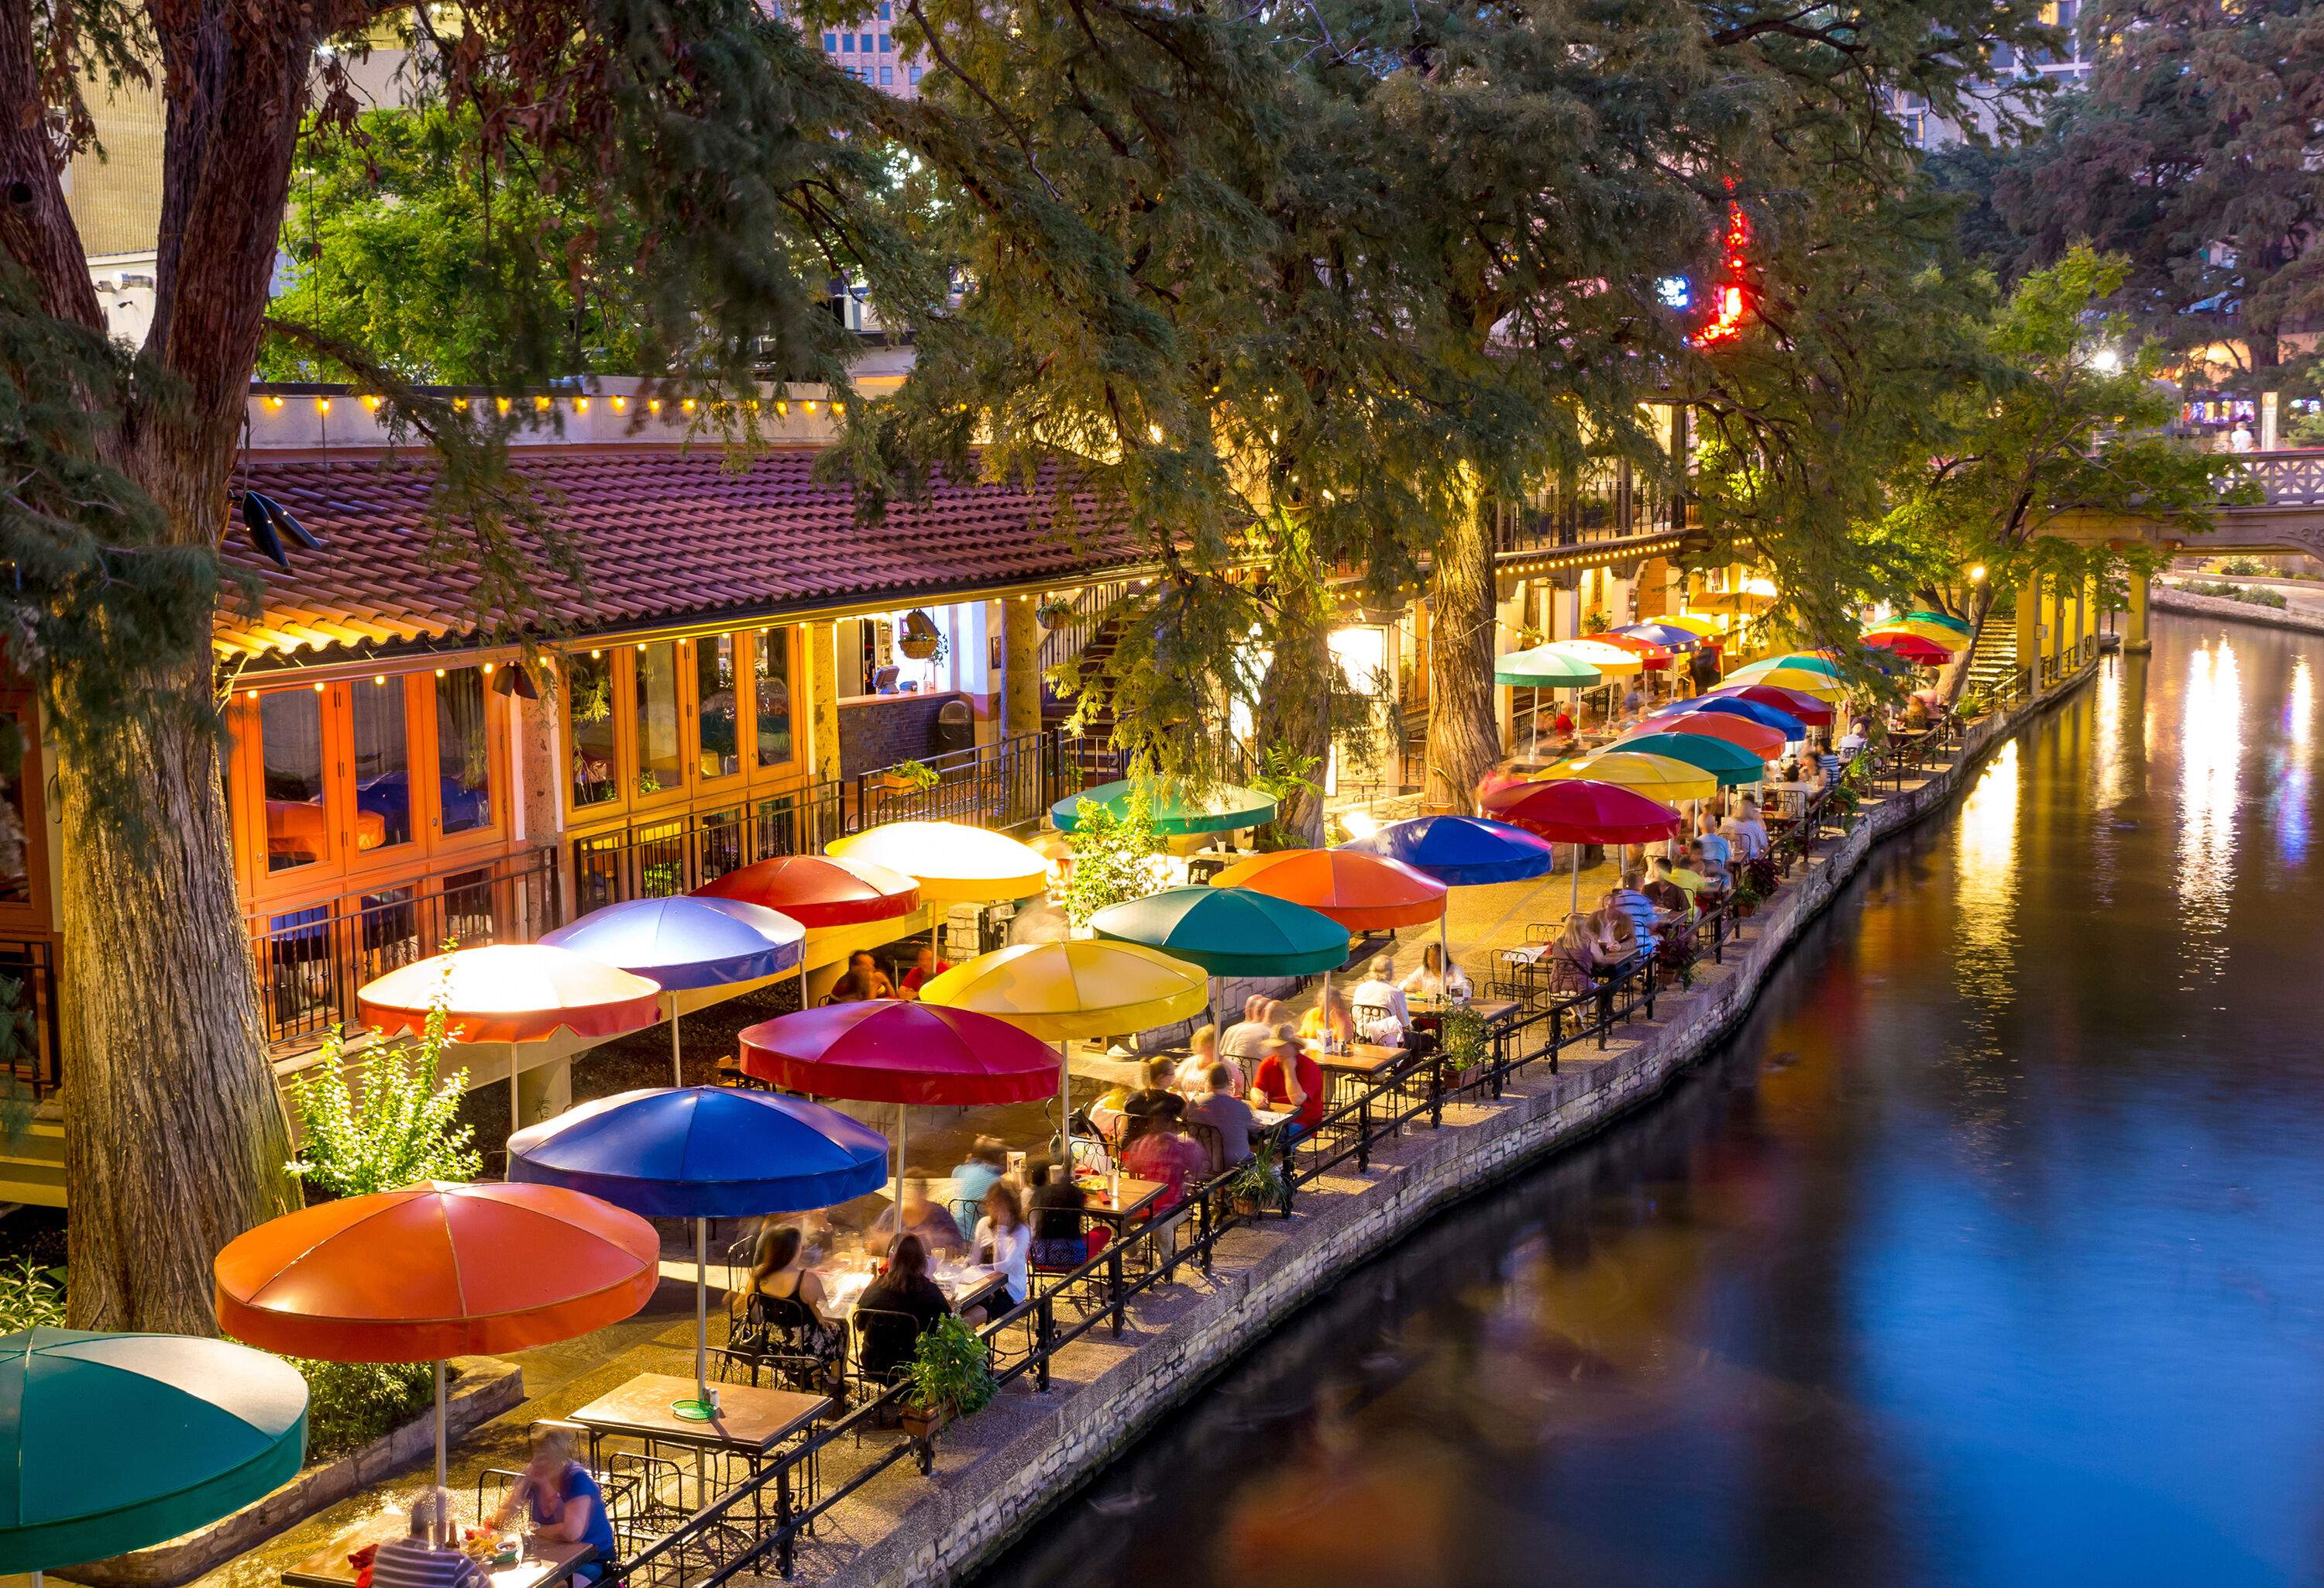 A scenic riverwalk unfolds, featuring rows of vibrant parasols and buildings with inviting outdoor dining, all set amidst a backdrop of towering trees.